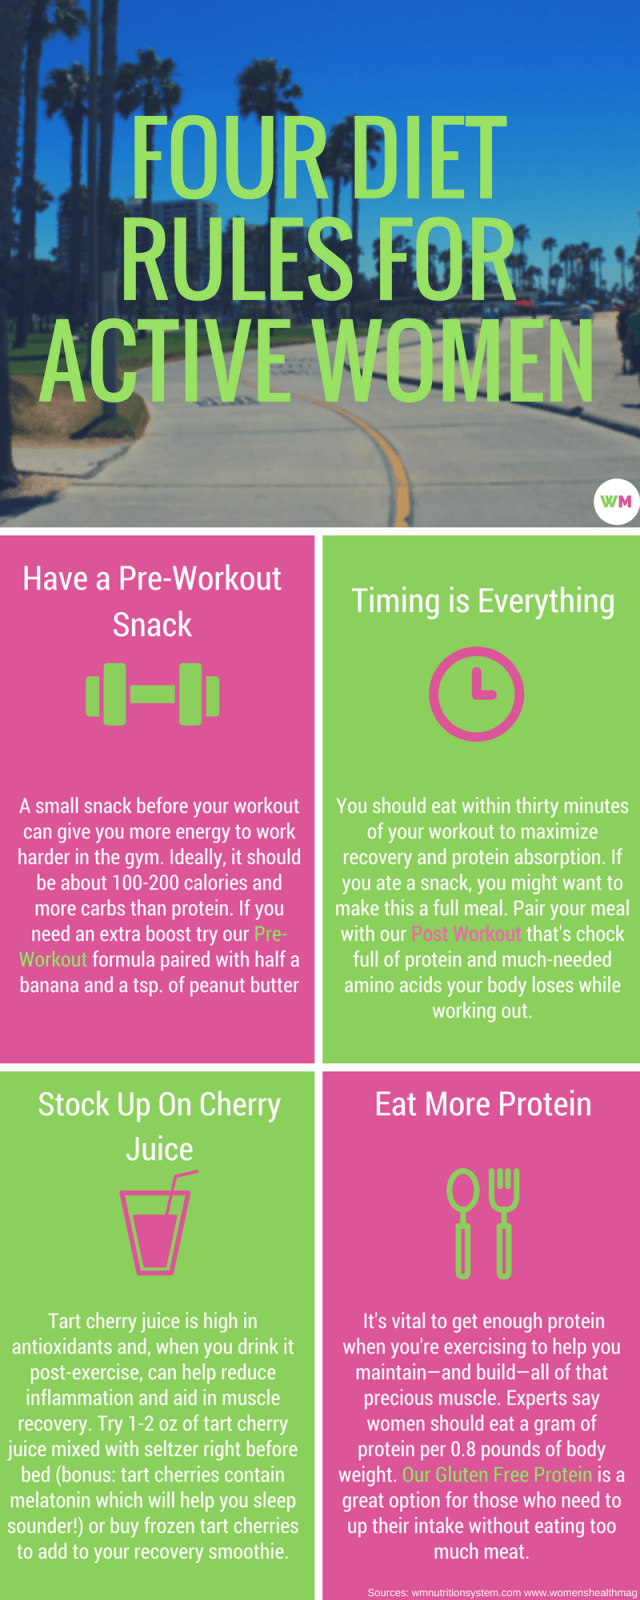 four diet rules for active women